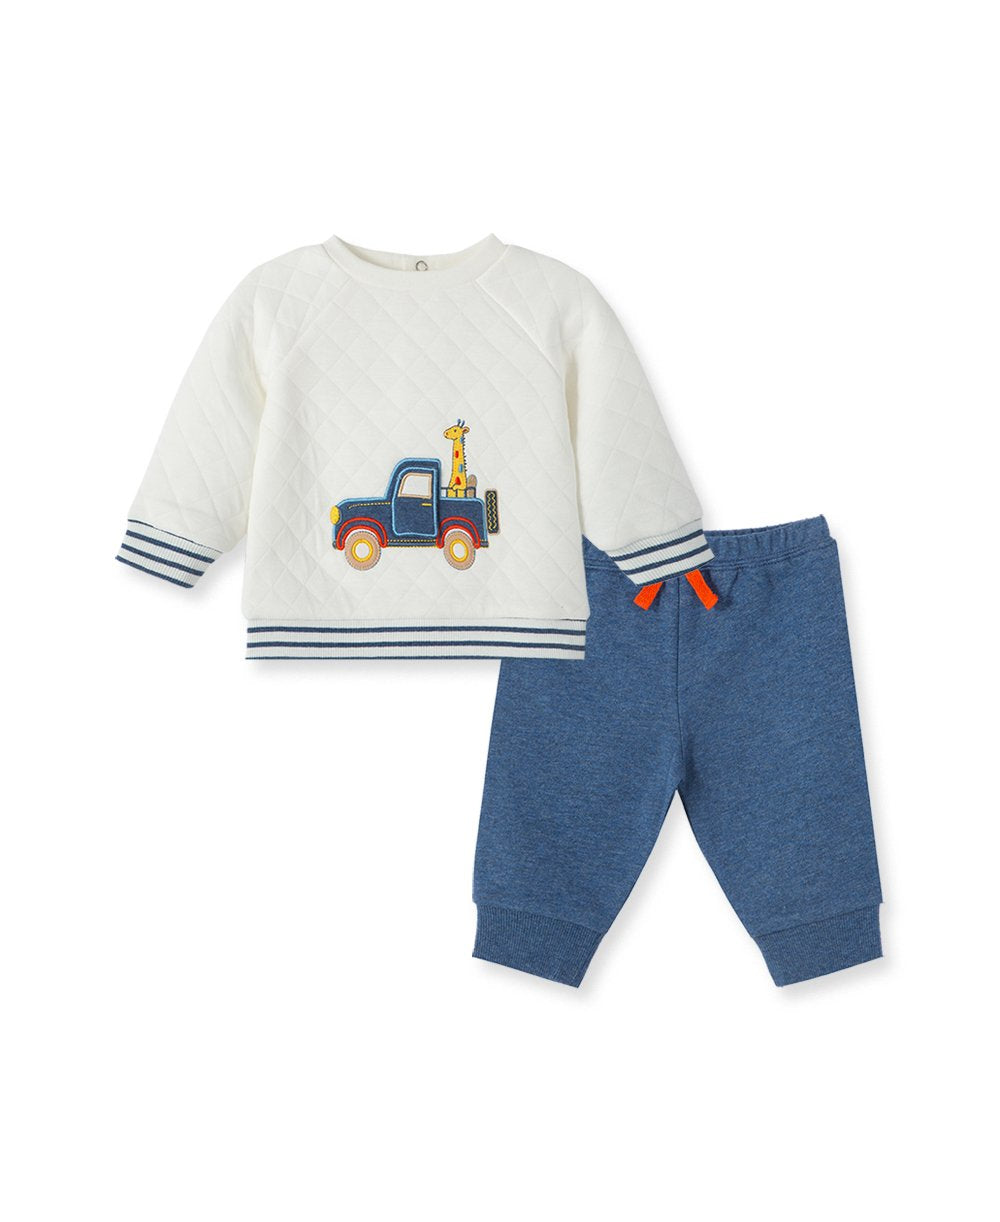 King of the Road Pant Set 10965